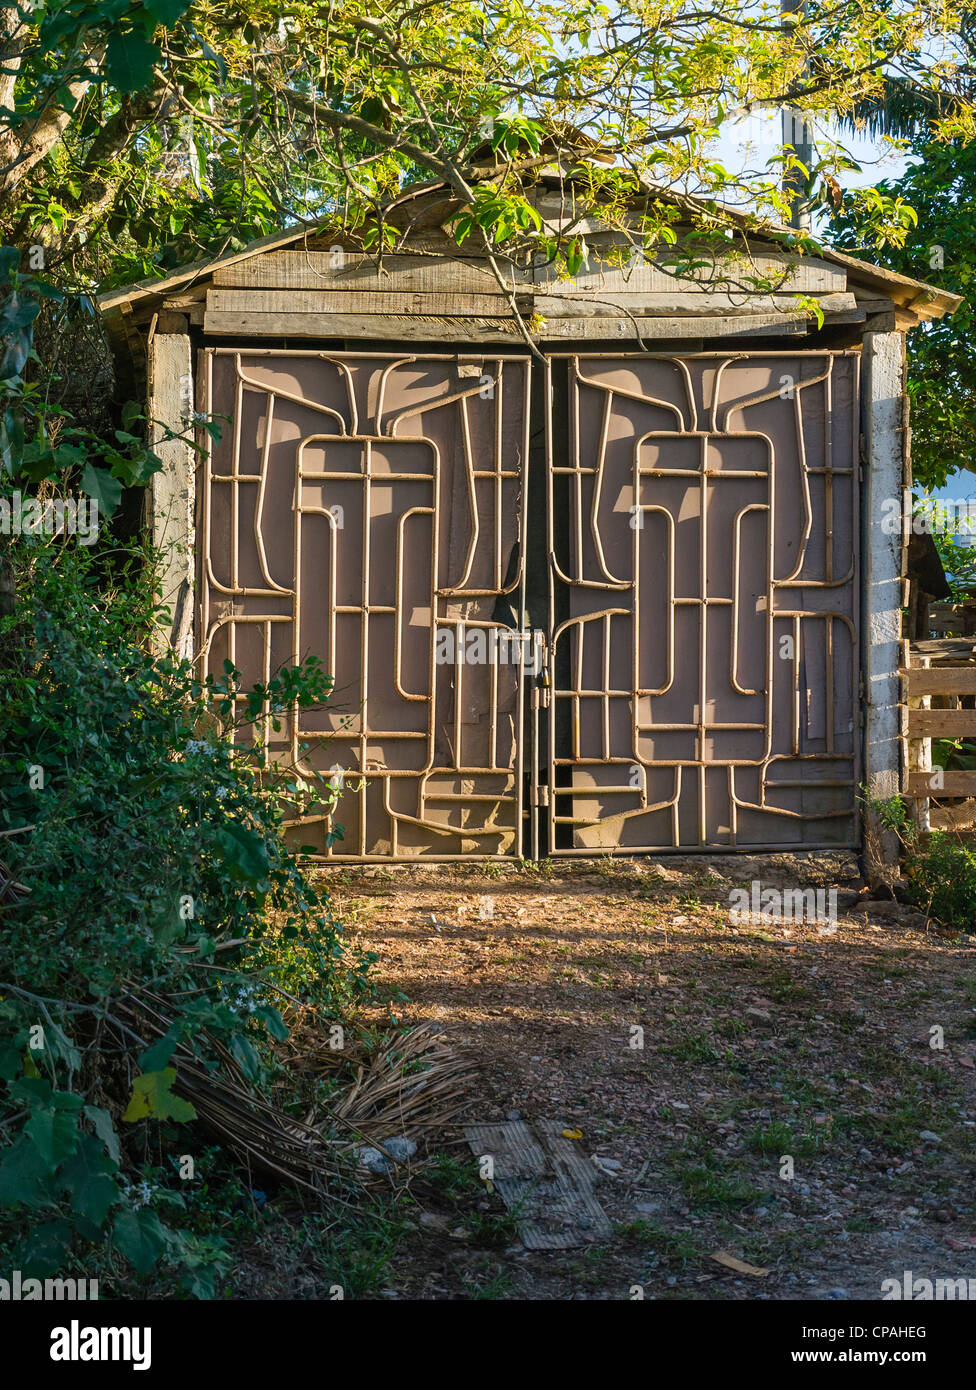 Double garage doors with tubular metal decoration on the outside resembling a labyrinth in a single car garage in Viñales, Cuba. Stock Photo